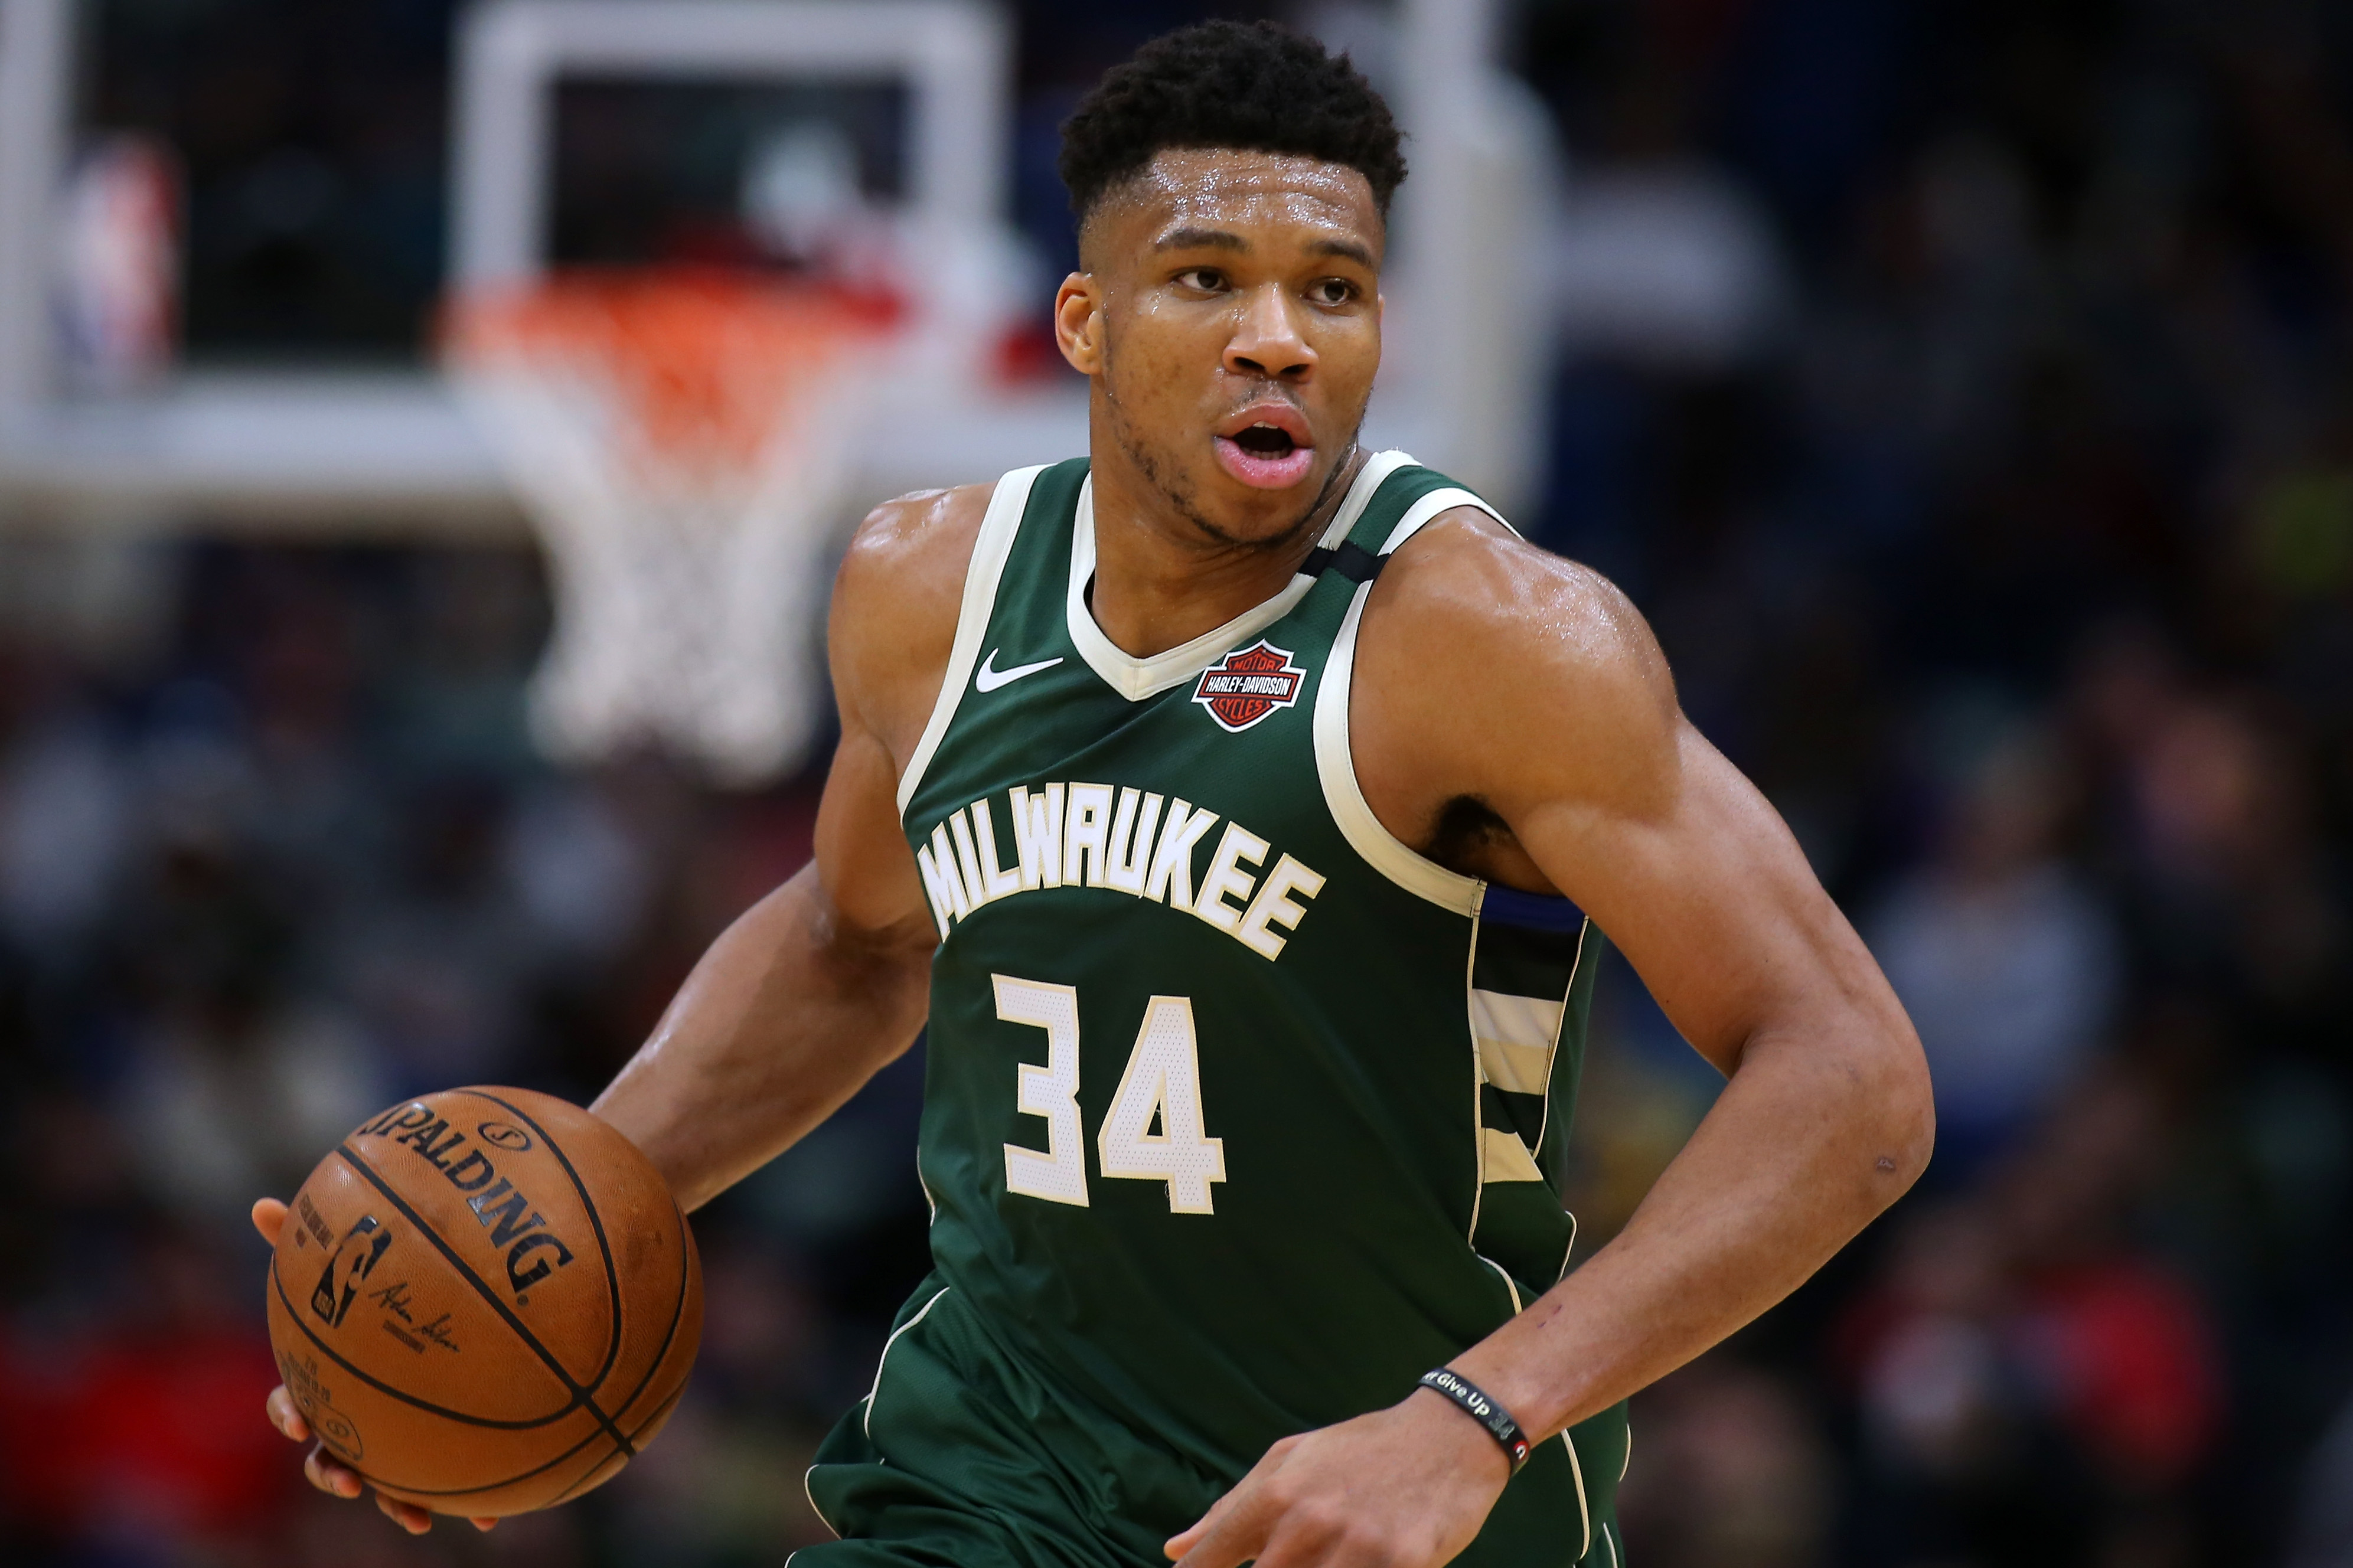 Giannis Antetokounmpo adds an unexpected secret ingredient to his smoothies to help aid his recovery.